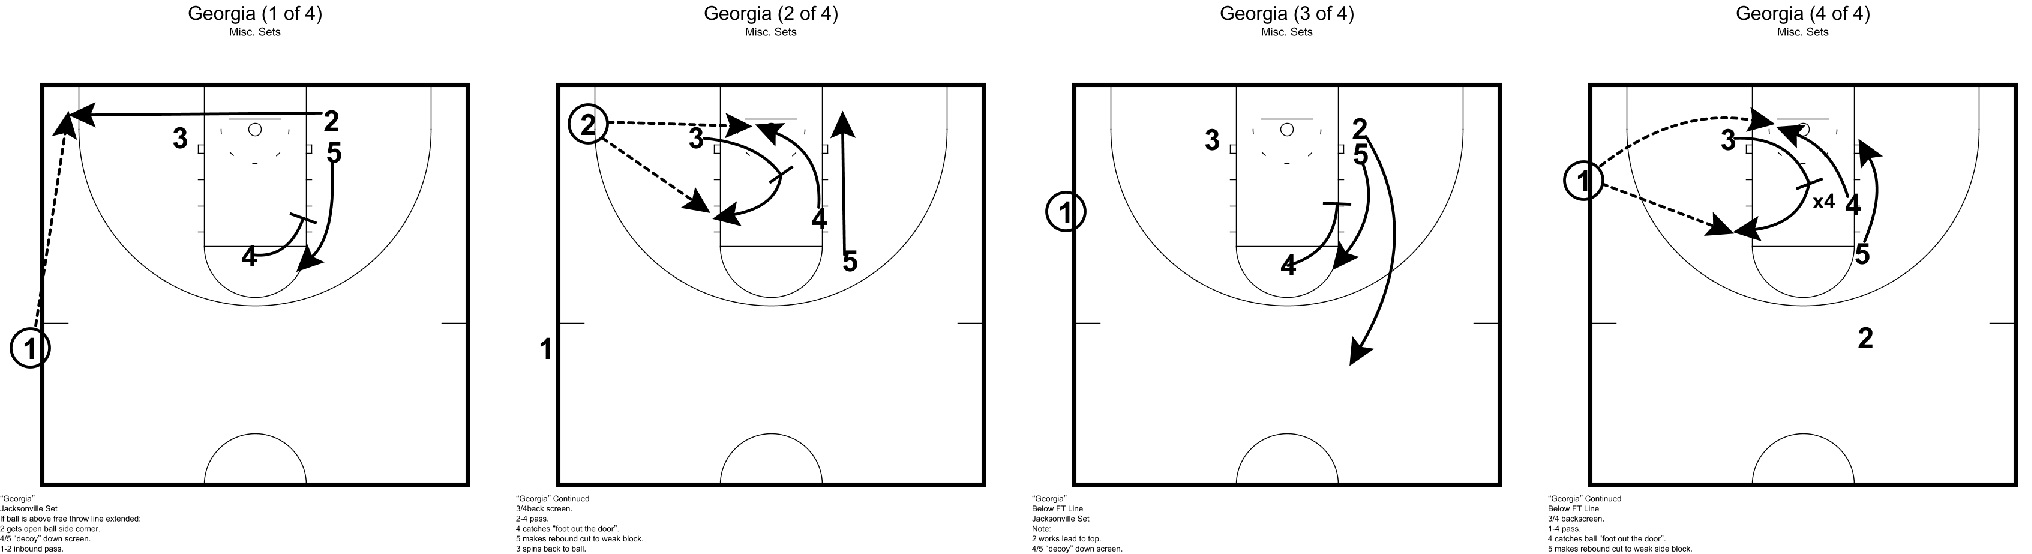 Basketball Play Diagram Georgia A Sideline Out Of Bounds Play Marty Gross Basketball